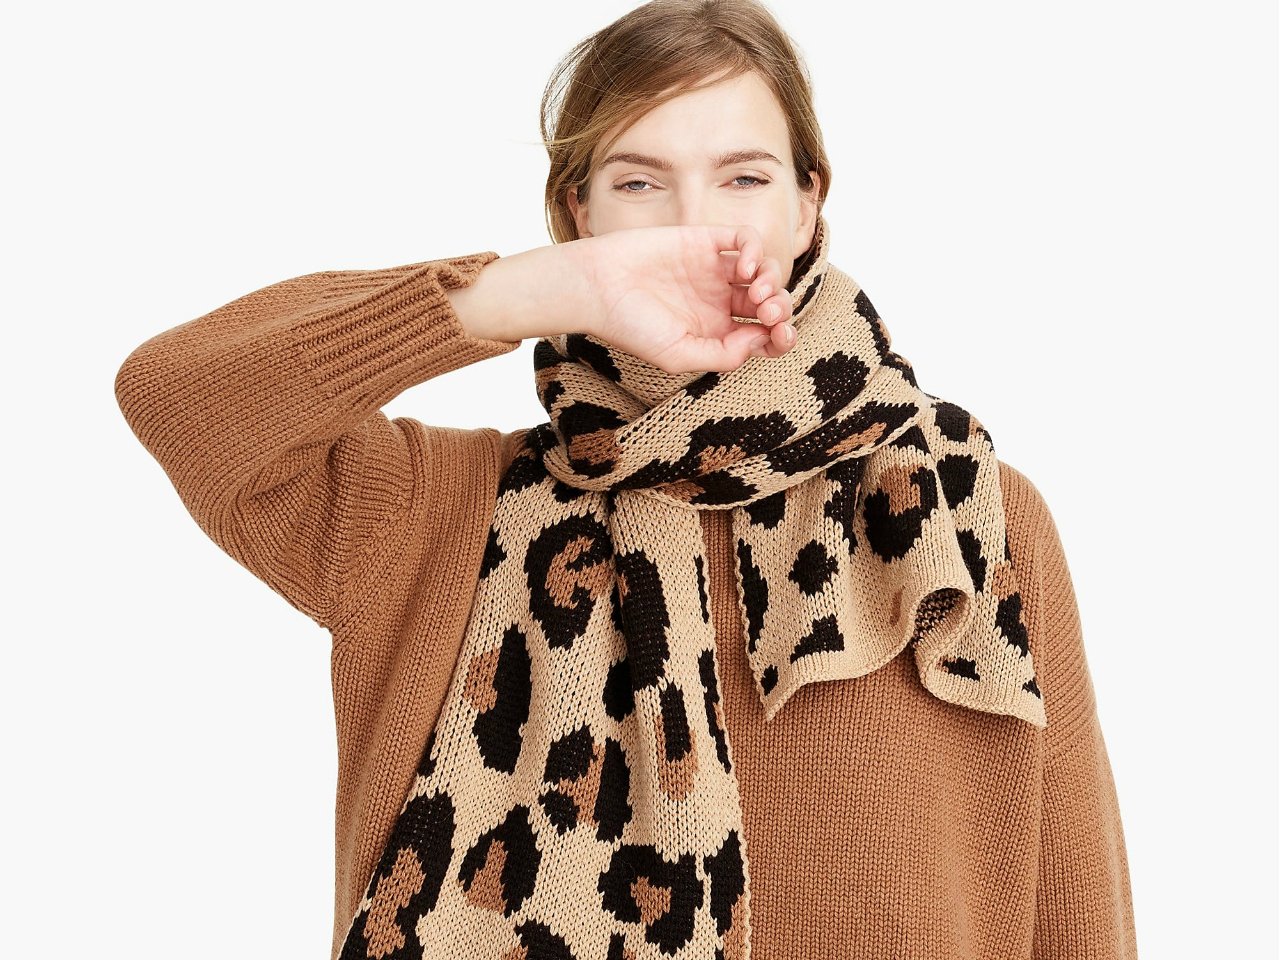 The One Print You Need to Try This Fall